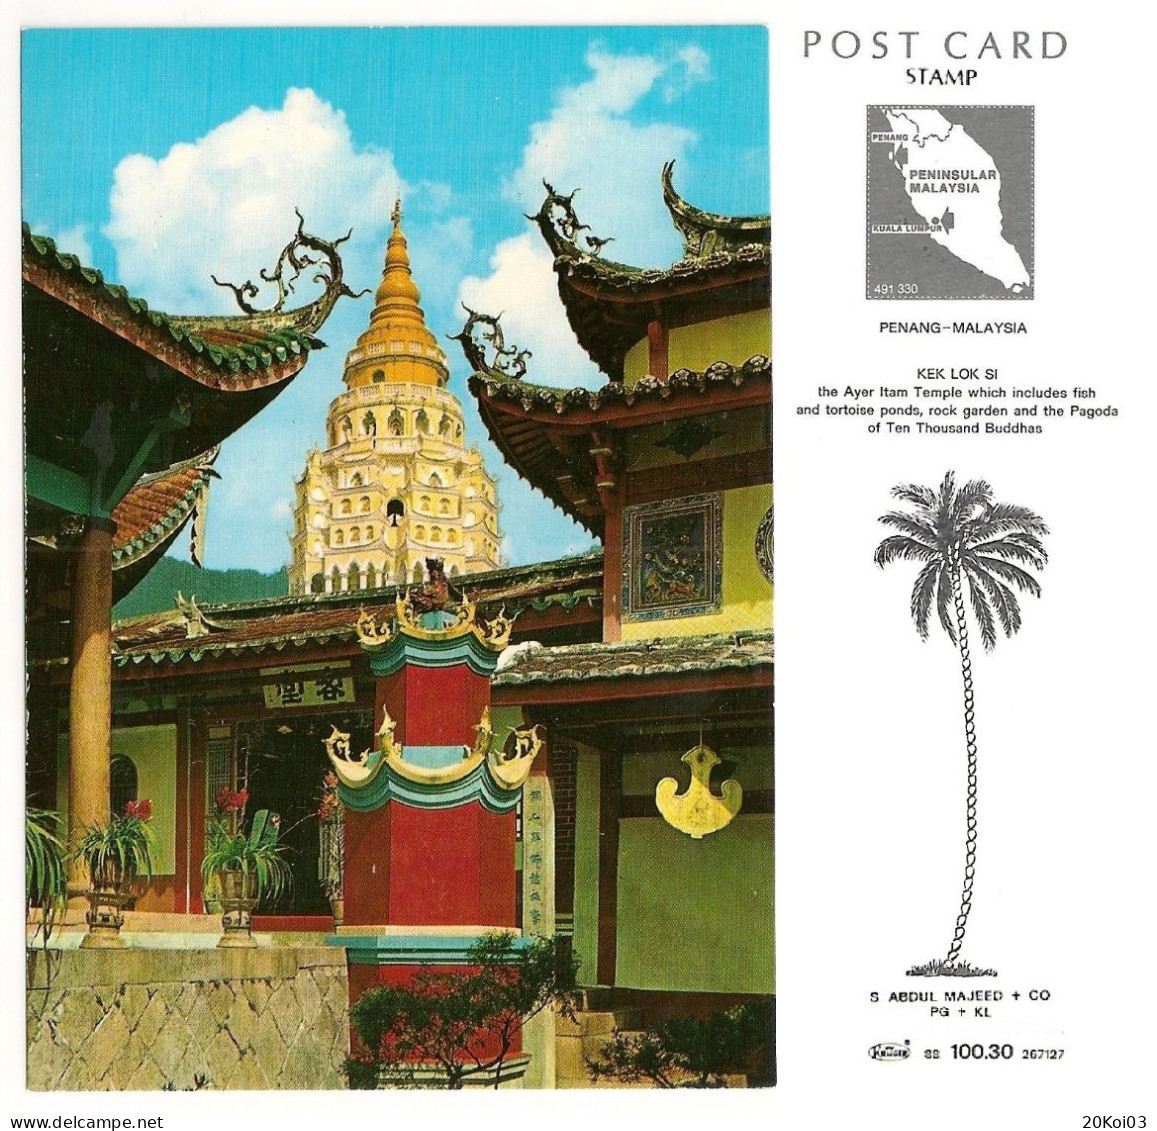 Malaysia Penang KEK LOK SI, Ayer Itam Temple, +/-1975's_UNC SUP_Kruger 88_100.30_S Abdul Majeed+CO_PG+KL_CPSM_cpc - Malesia